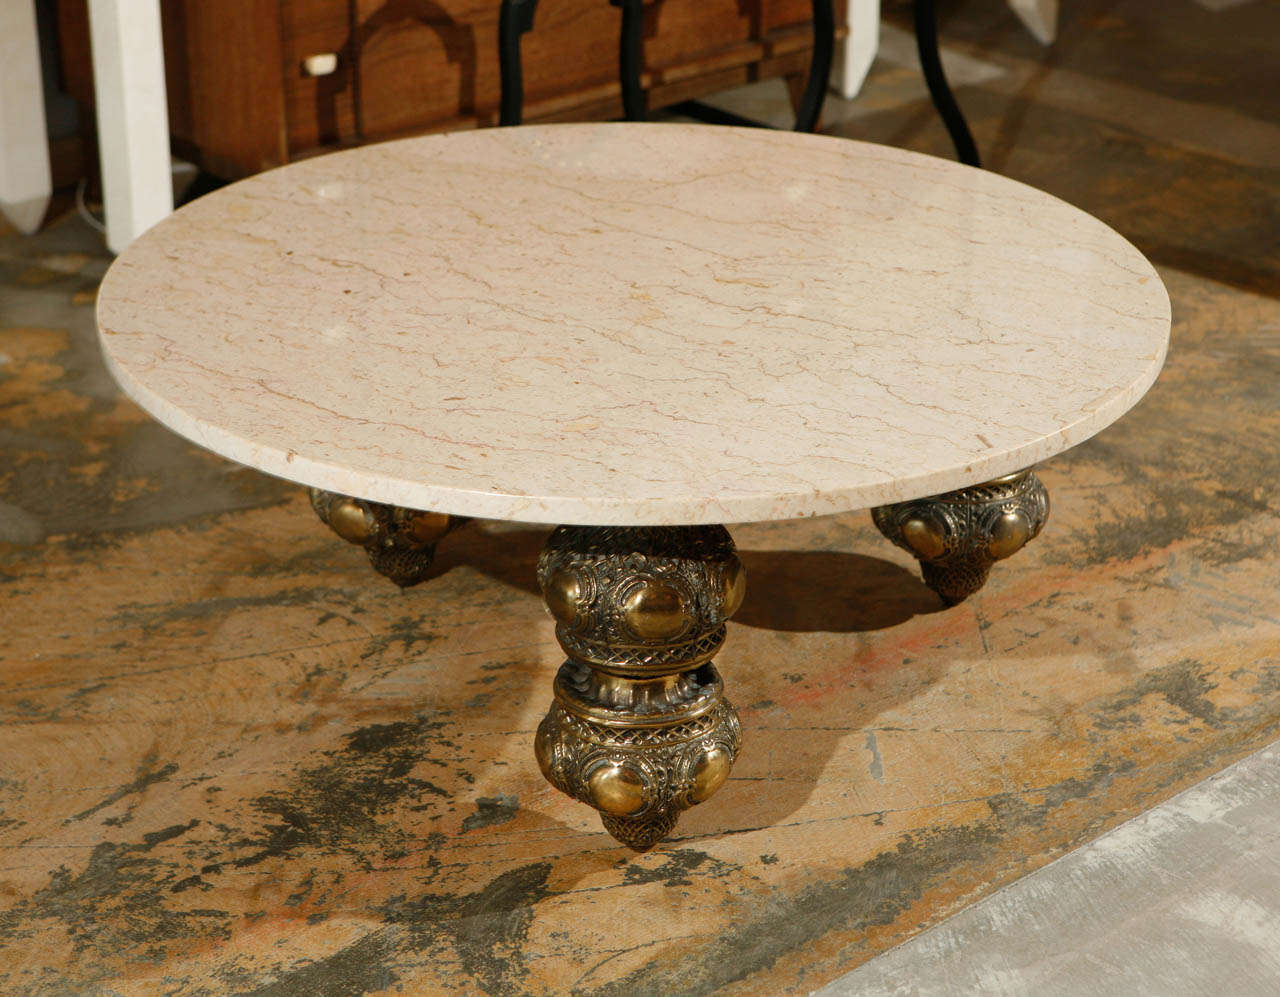 Mid-century coffee table with Morrocan style base and marble top.